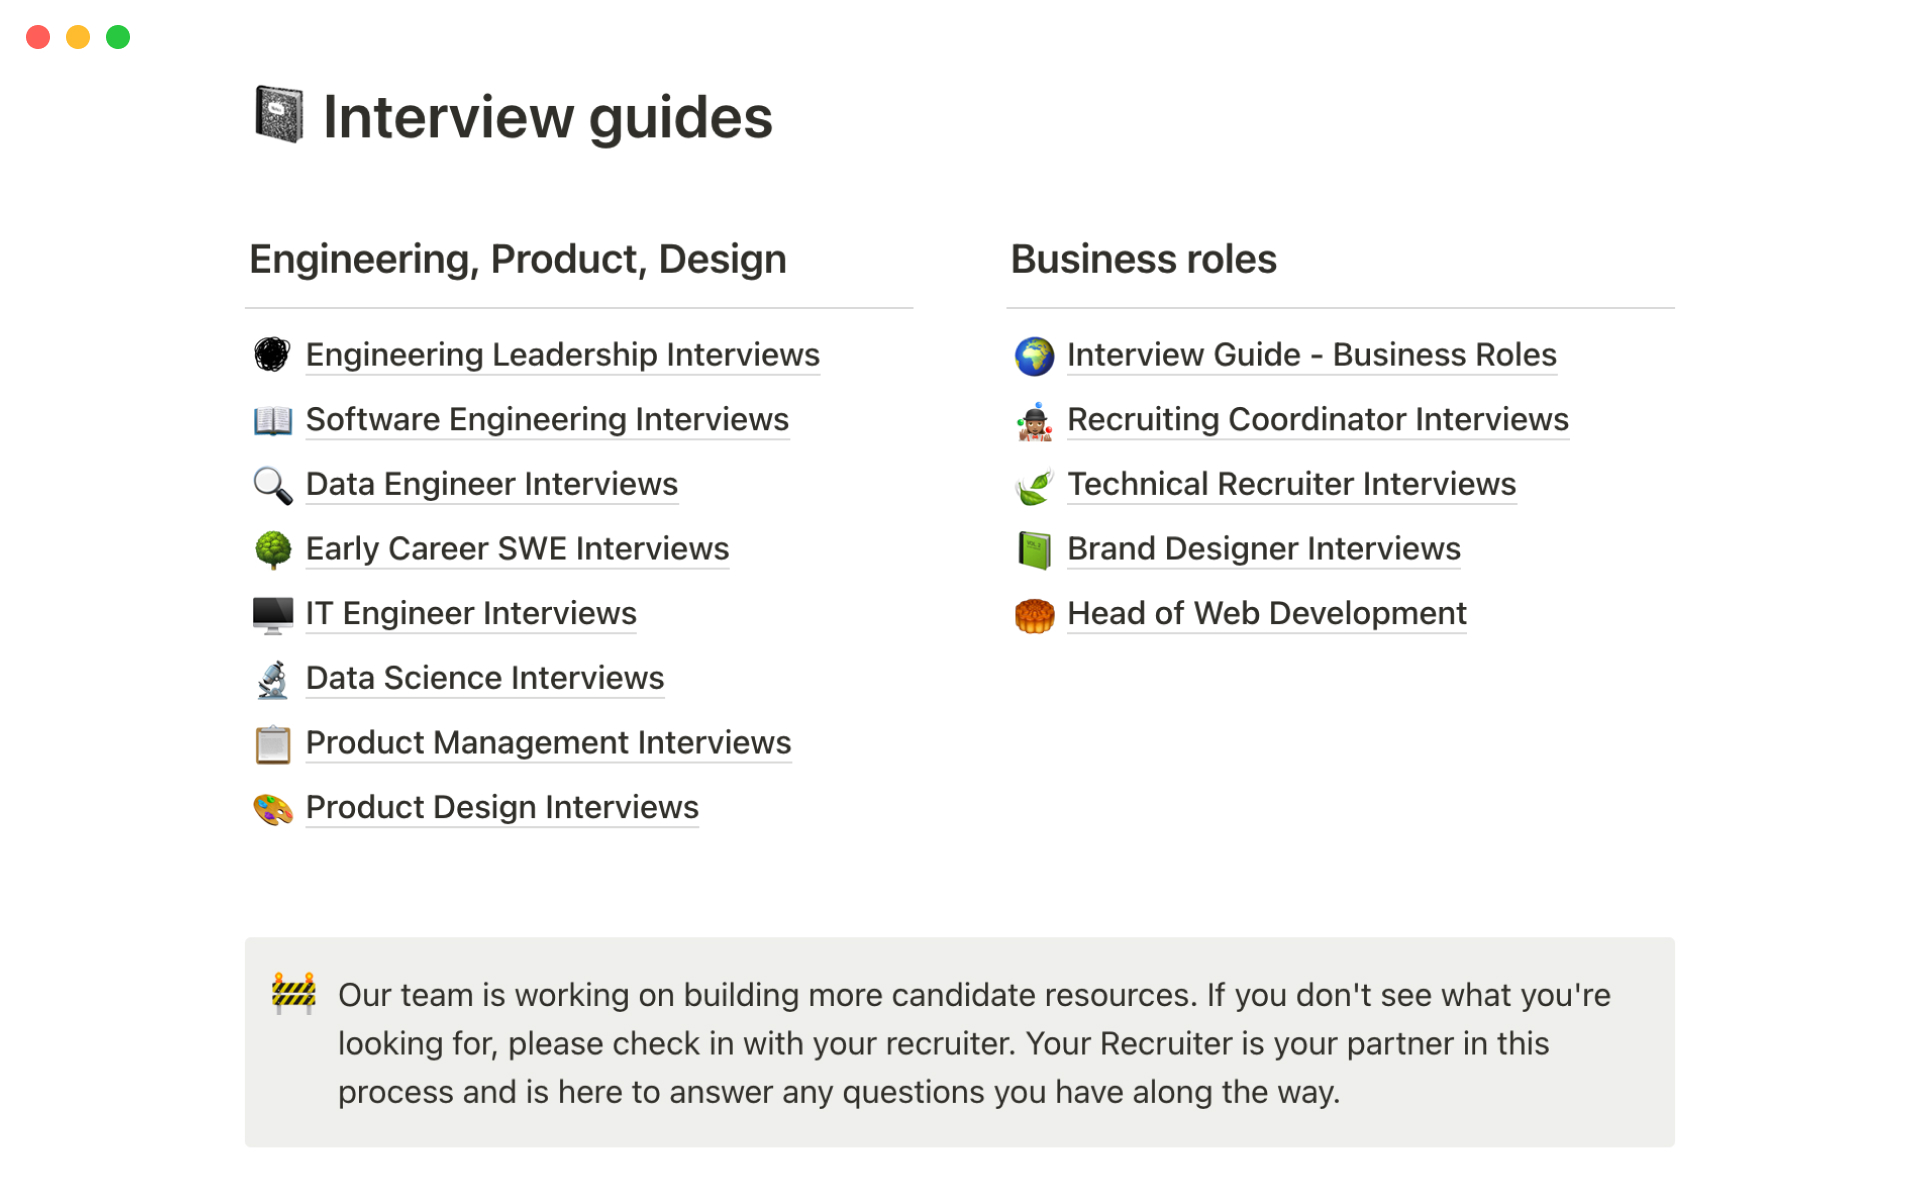 Prepare your candidate for their interview and provide resources like videos, links, schedules, and more.